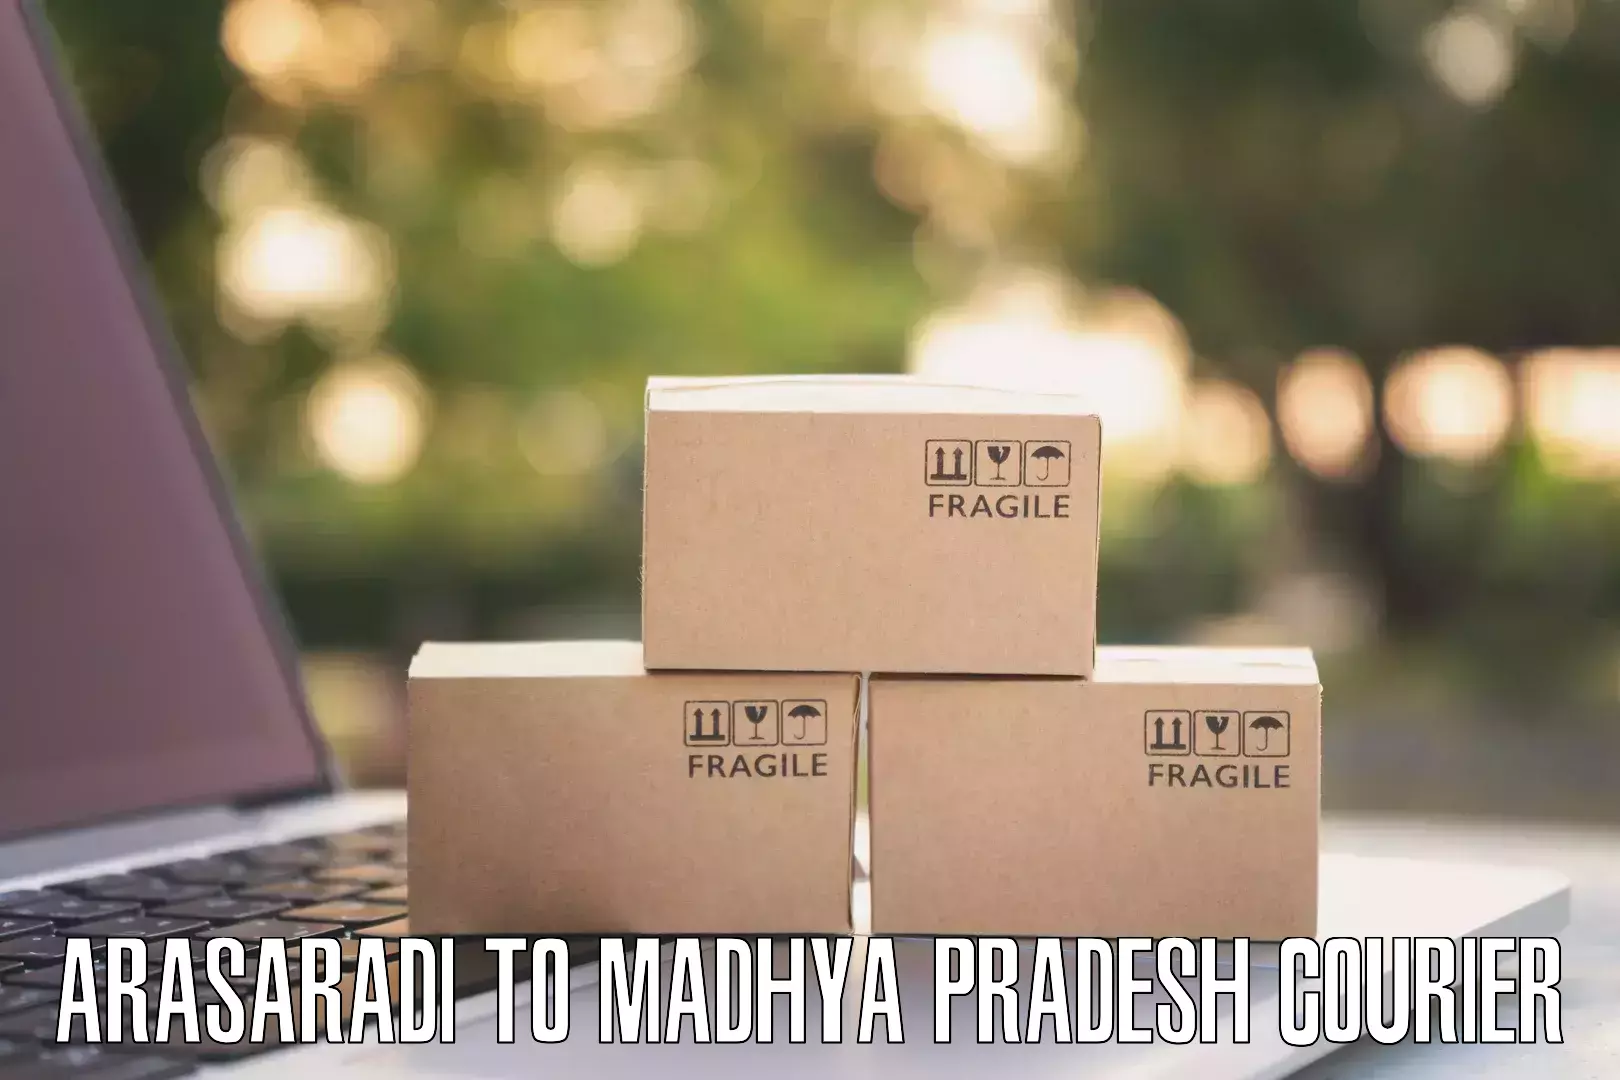 Large package courier in Arasaradi to Sheopur